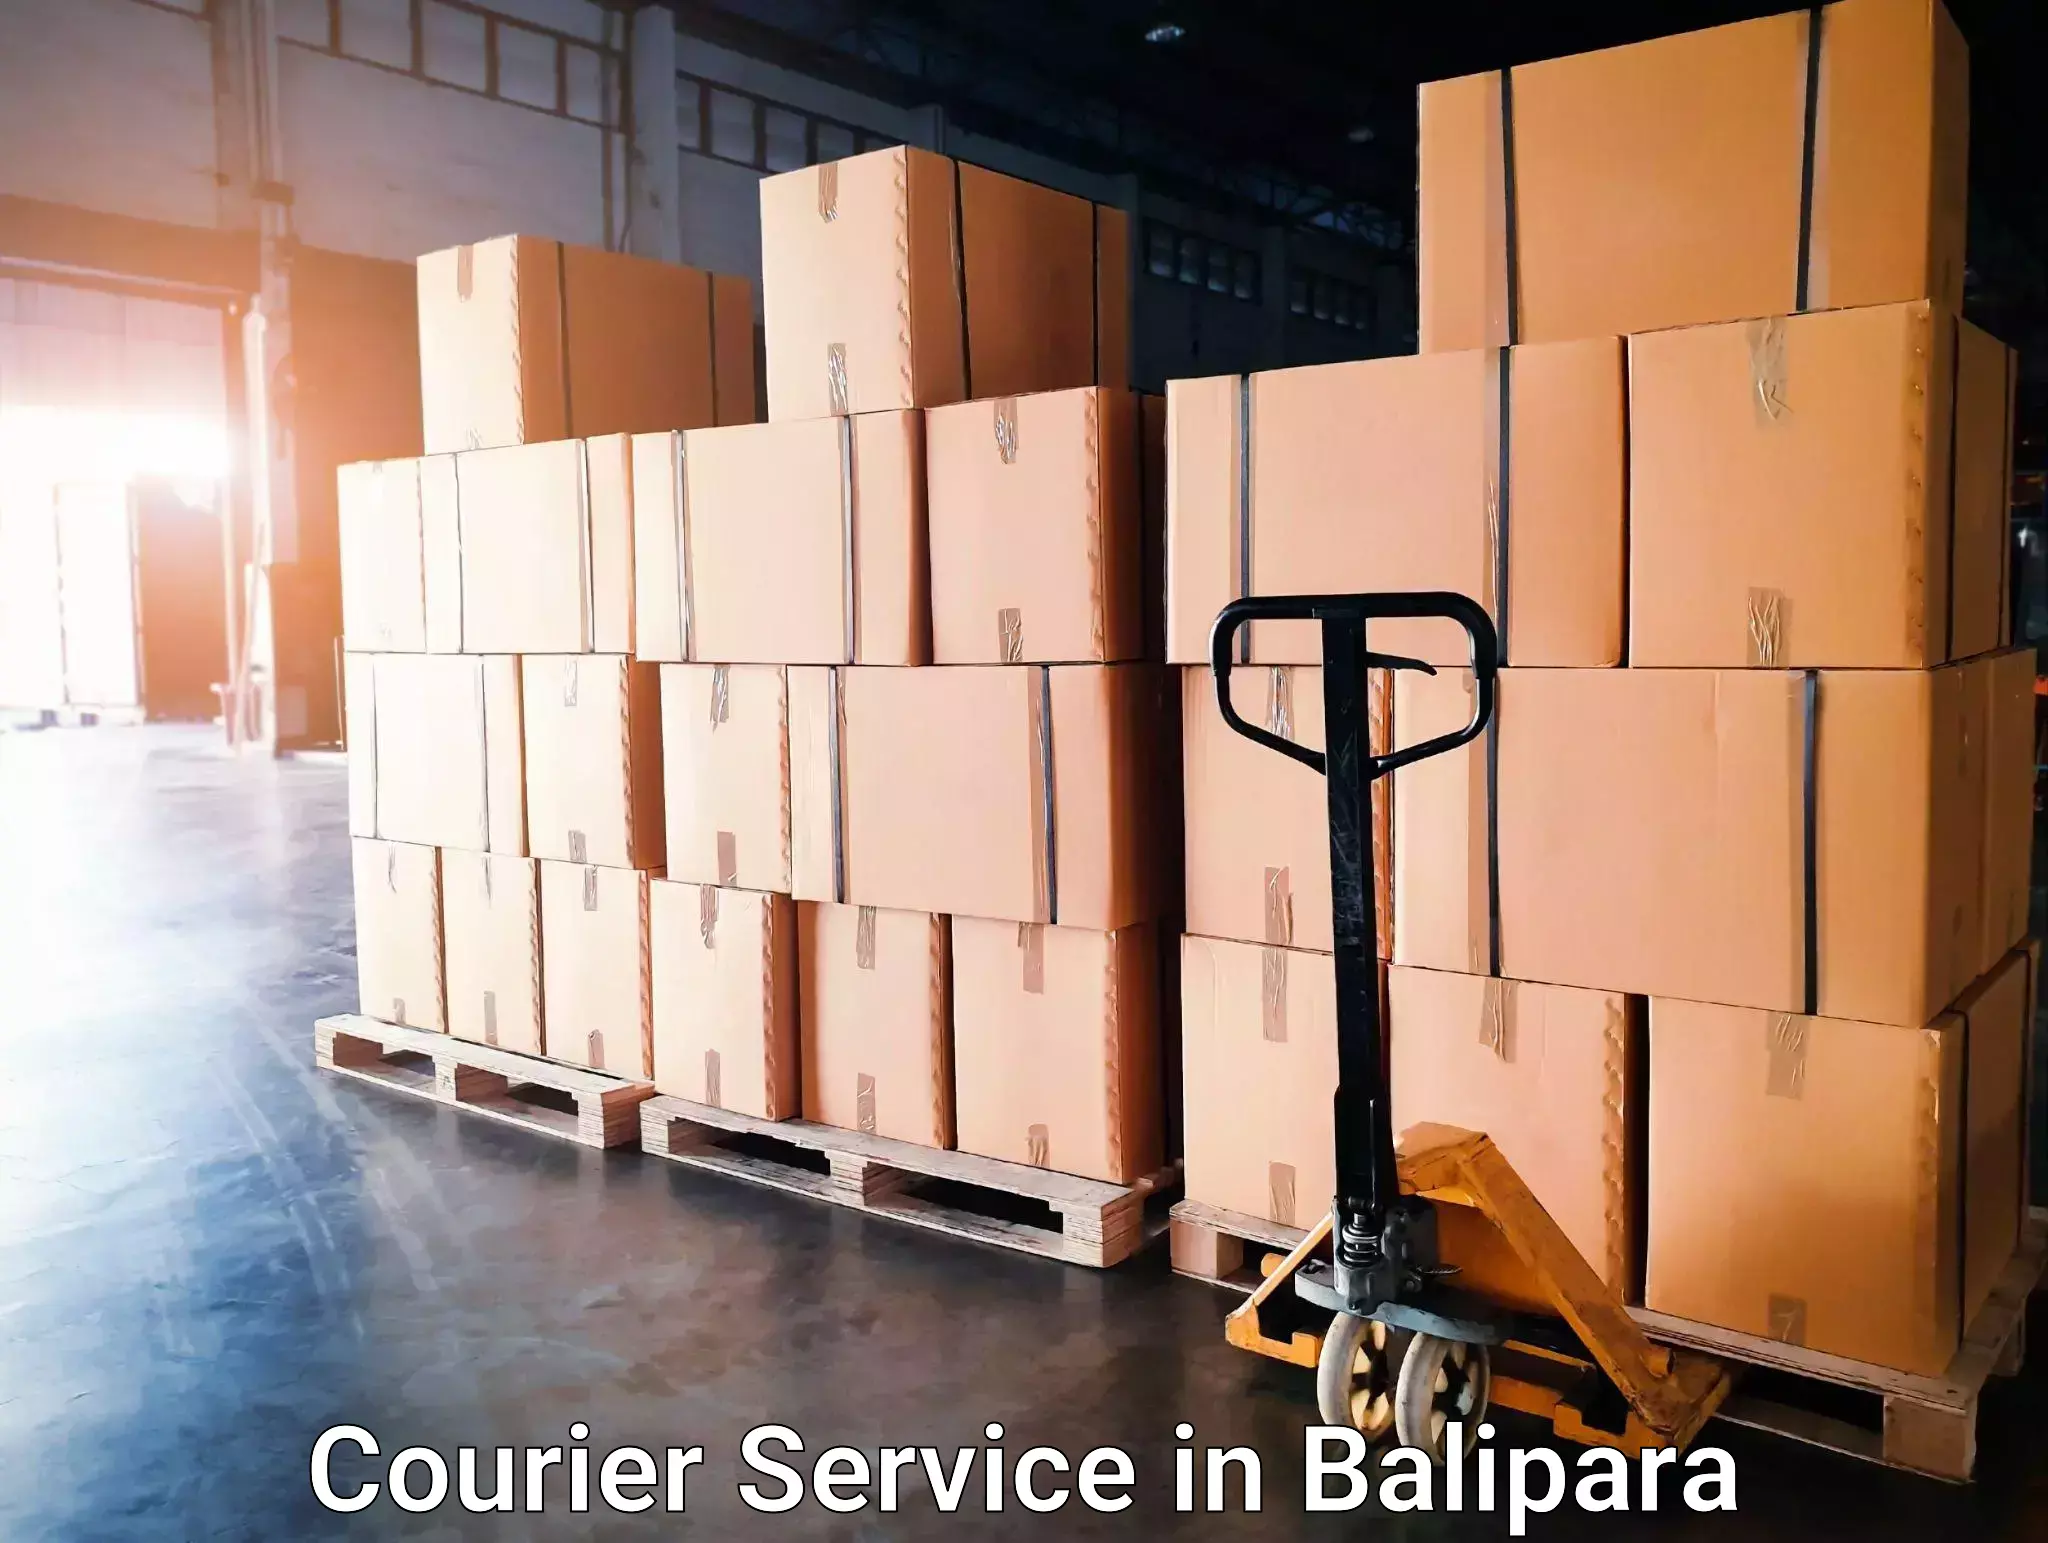 Efficient package consolidation in Balipara